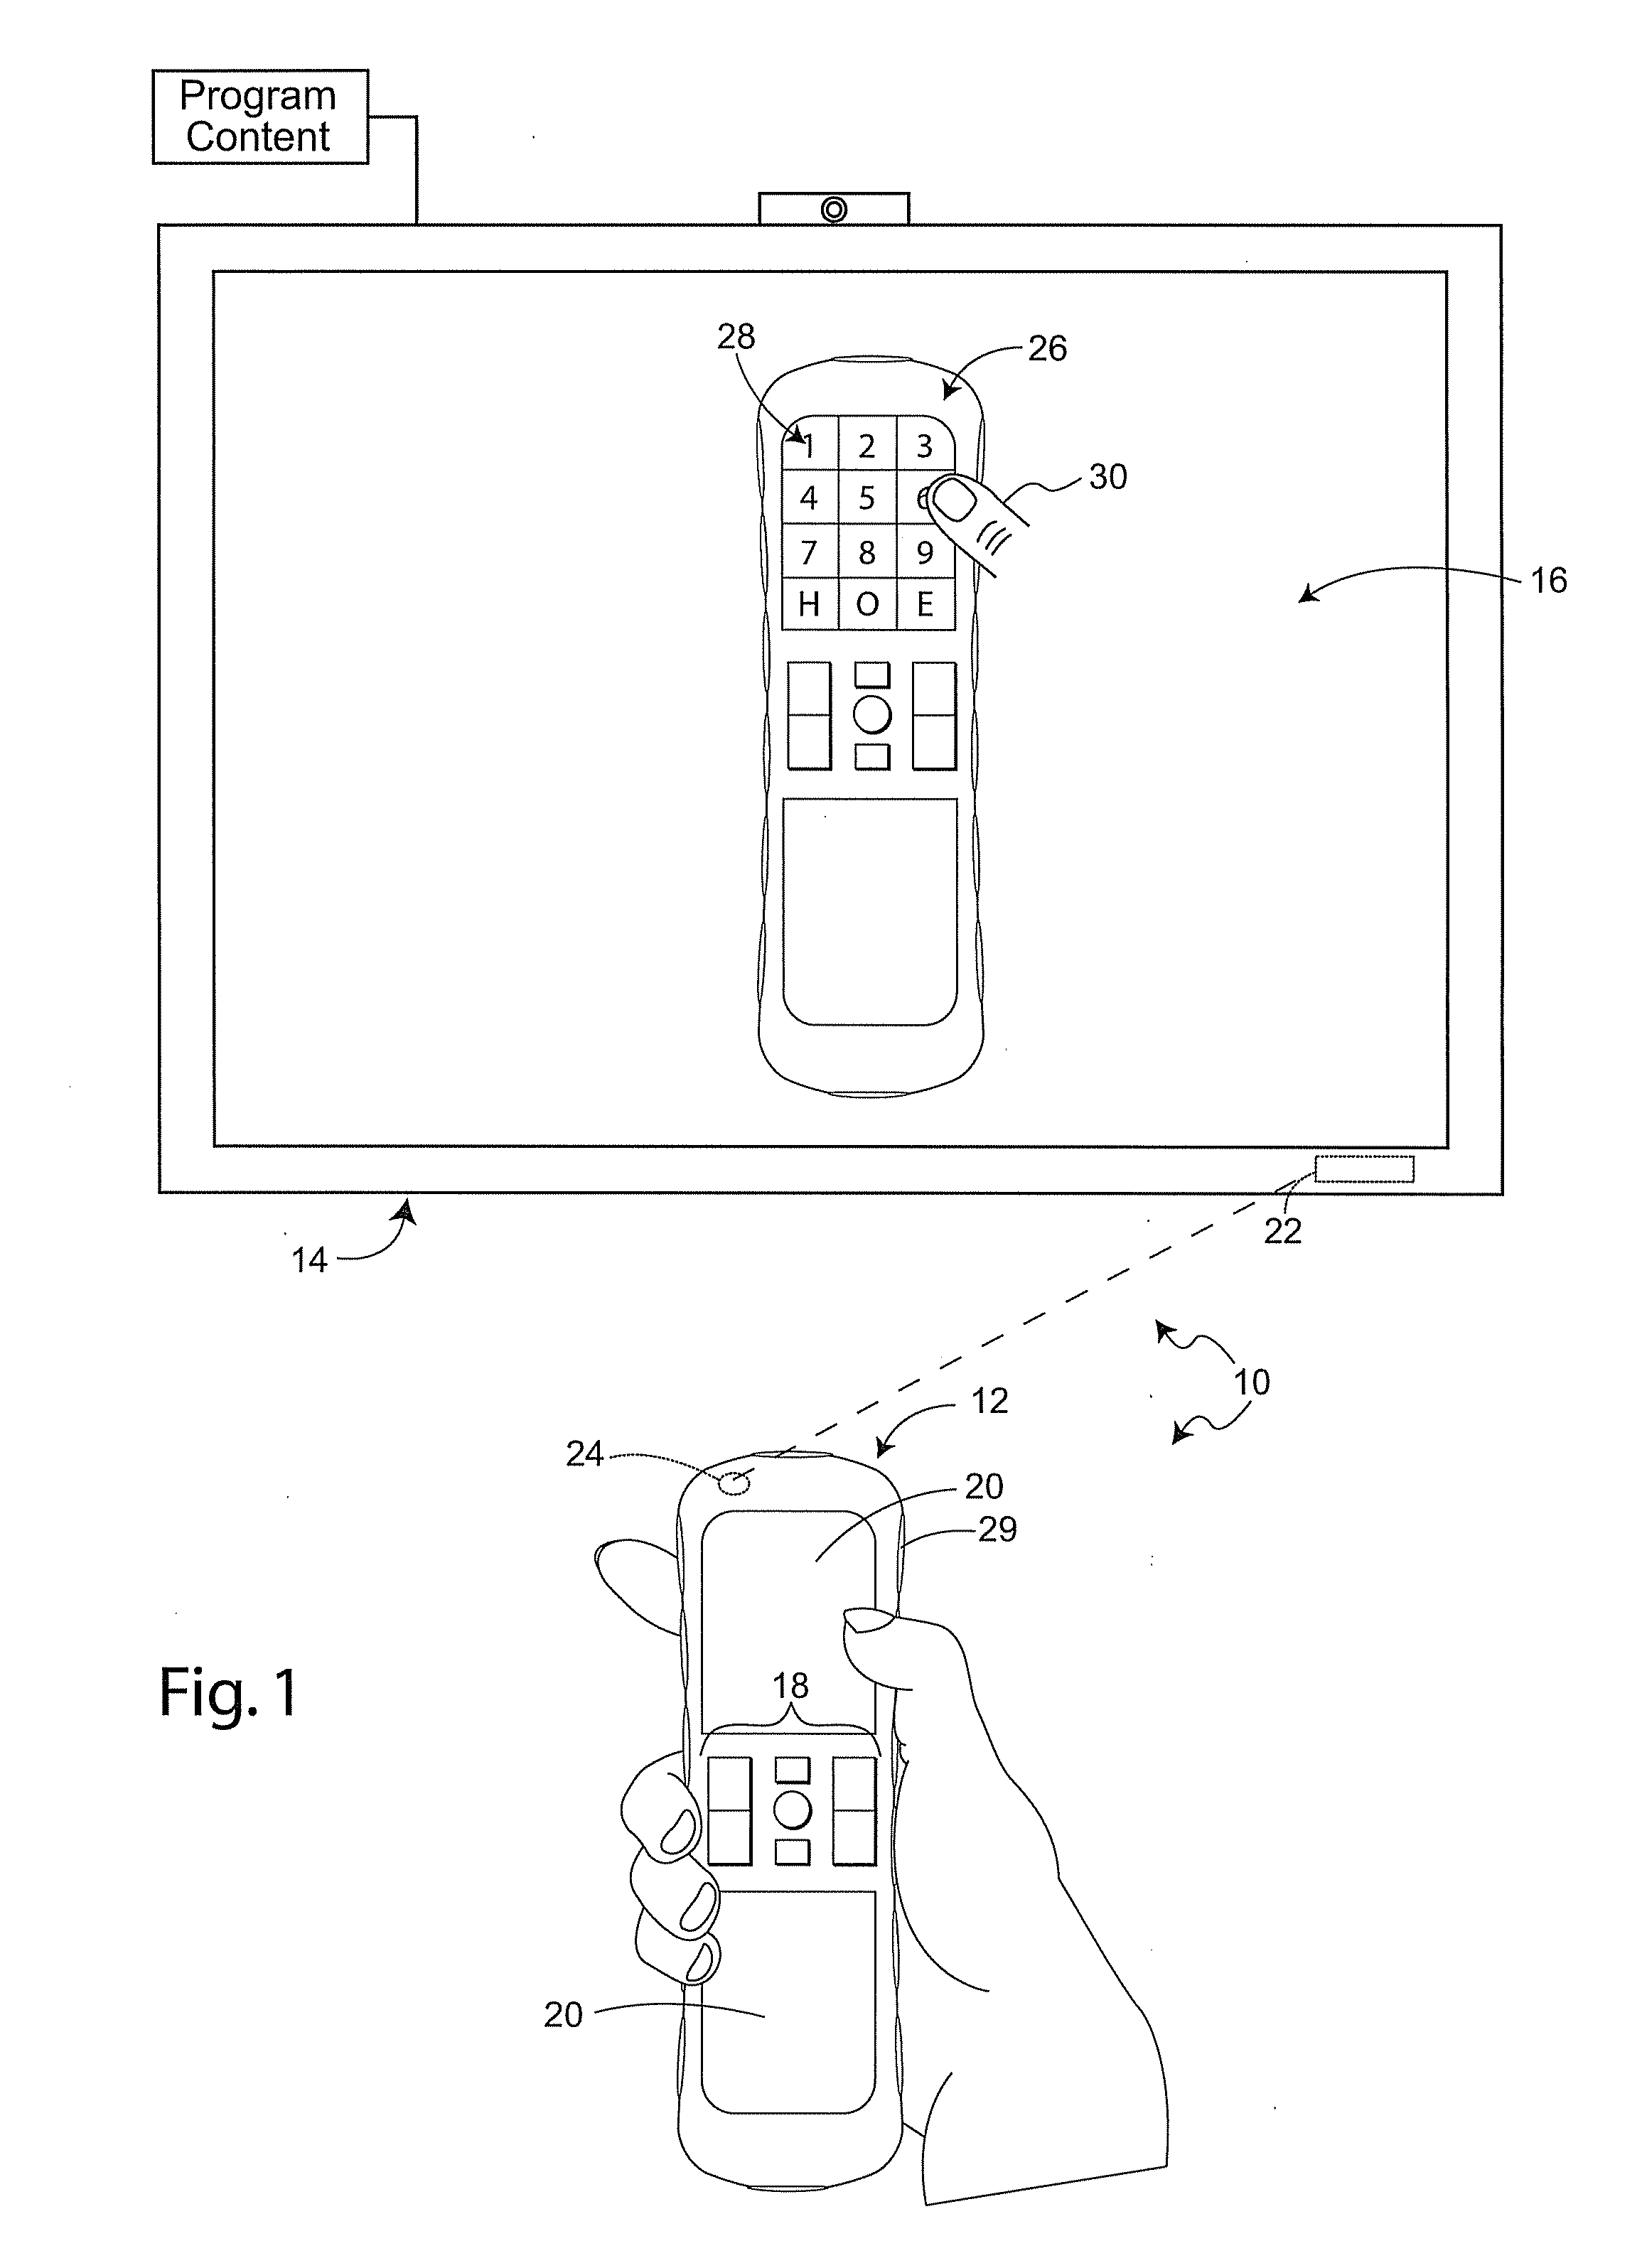 Method and system of identifying a user of a handheld device